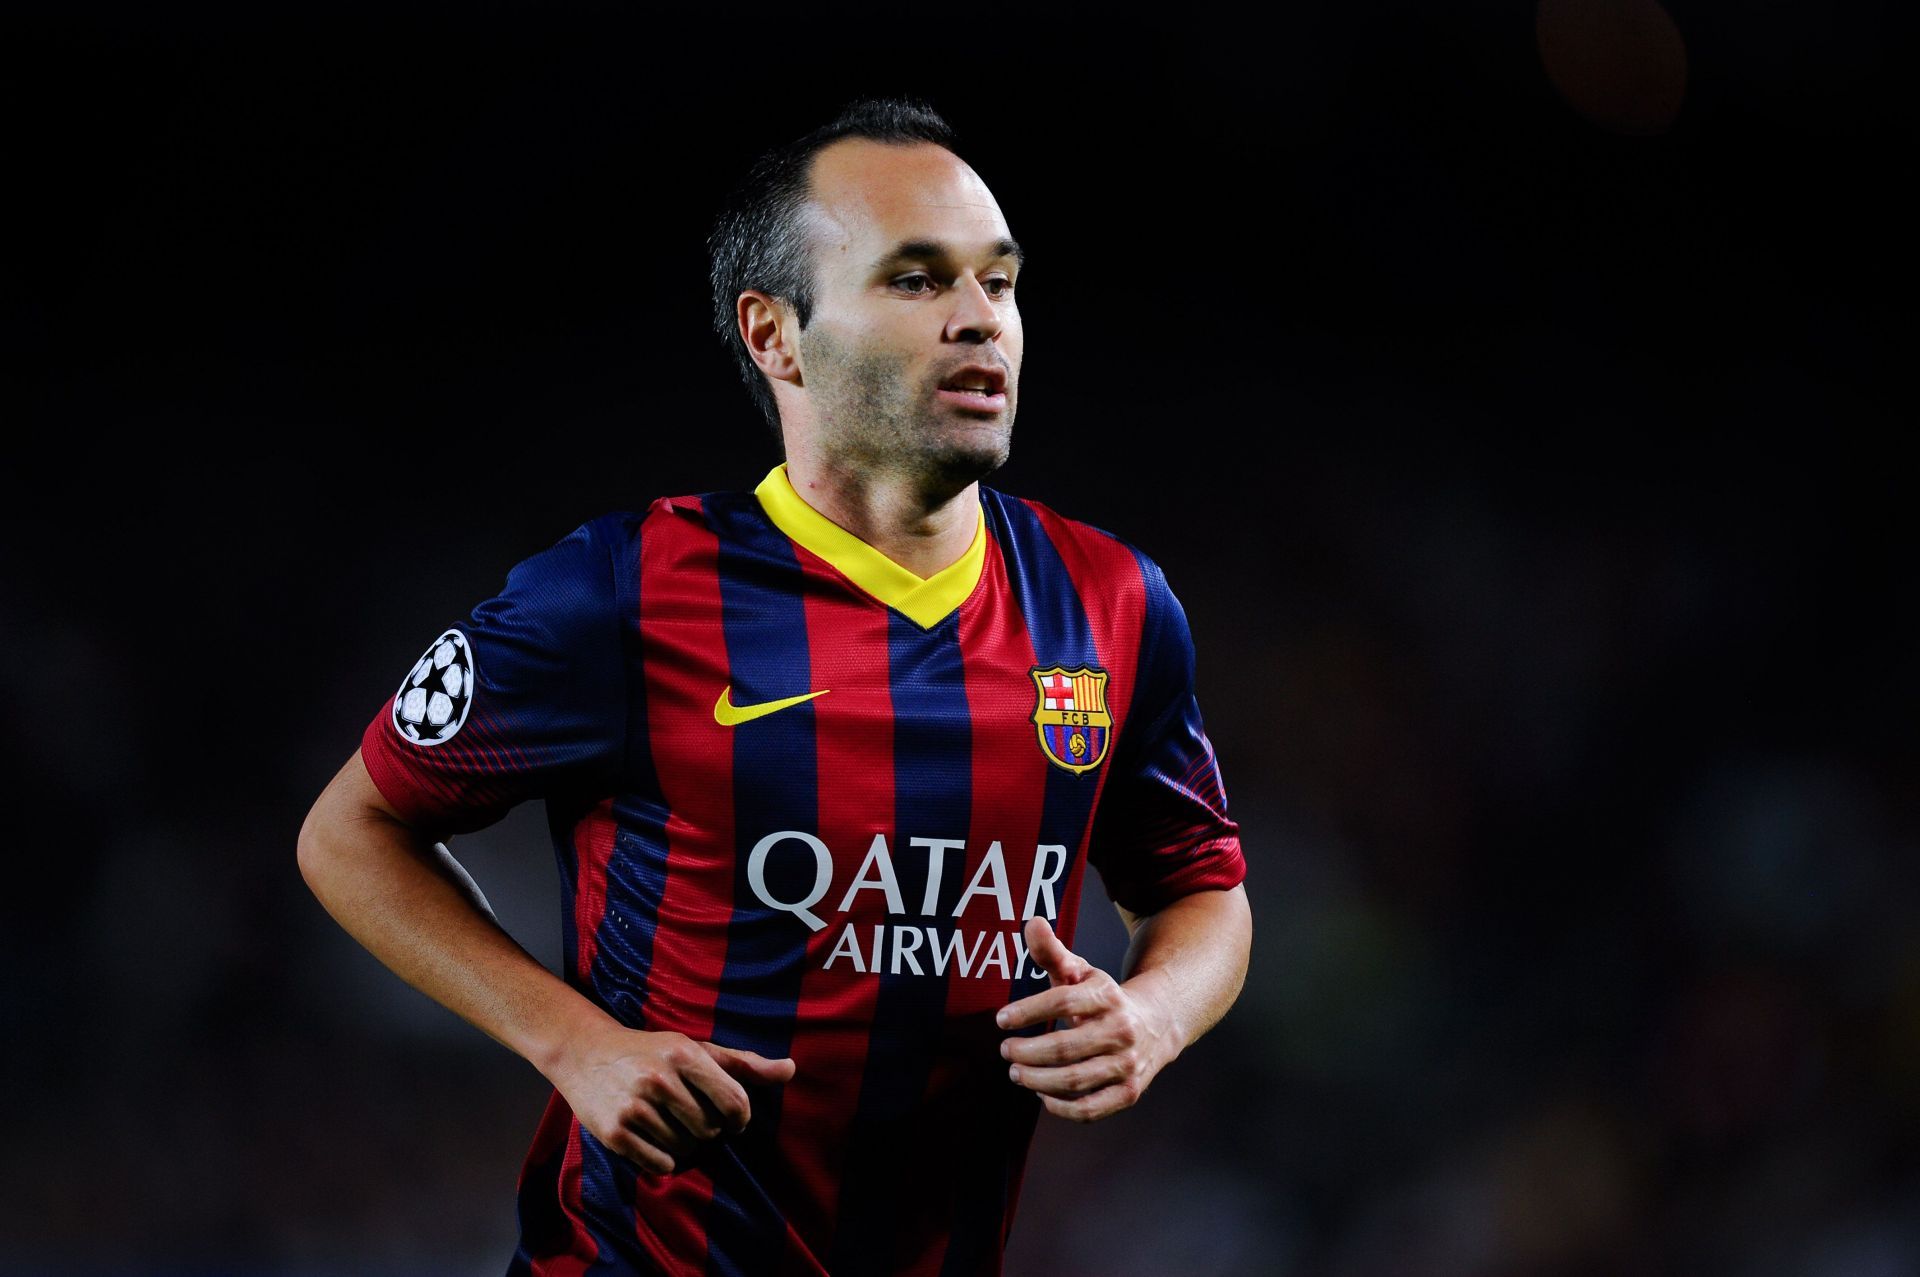 Andr&eacute;s Iniesta is regarded as one of the best players to ever play the game